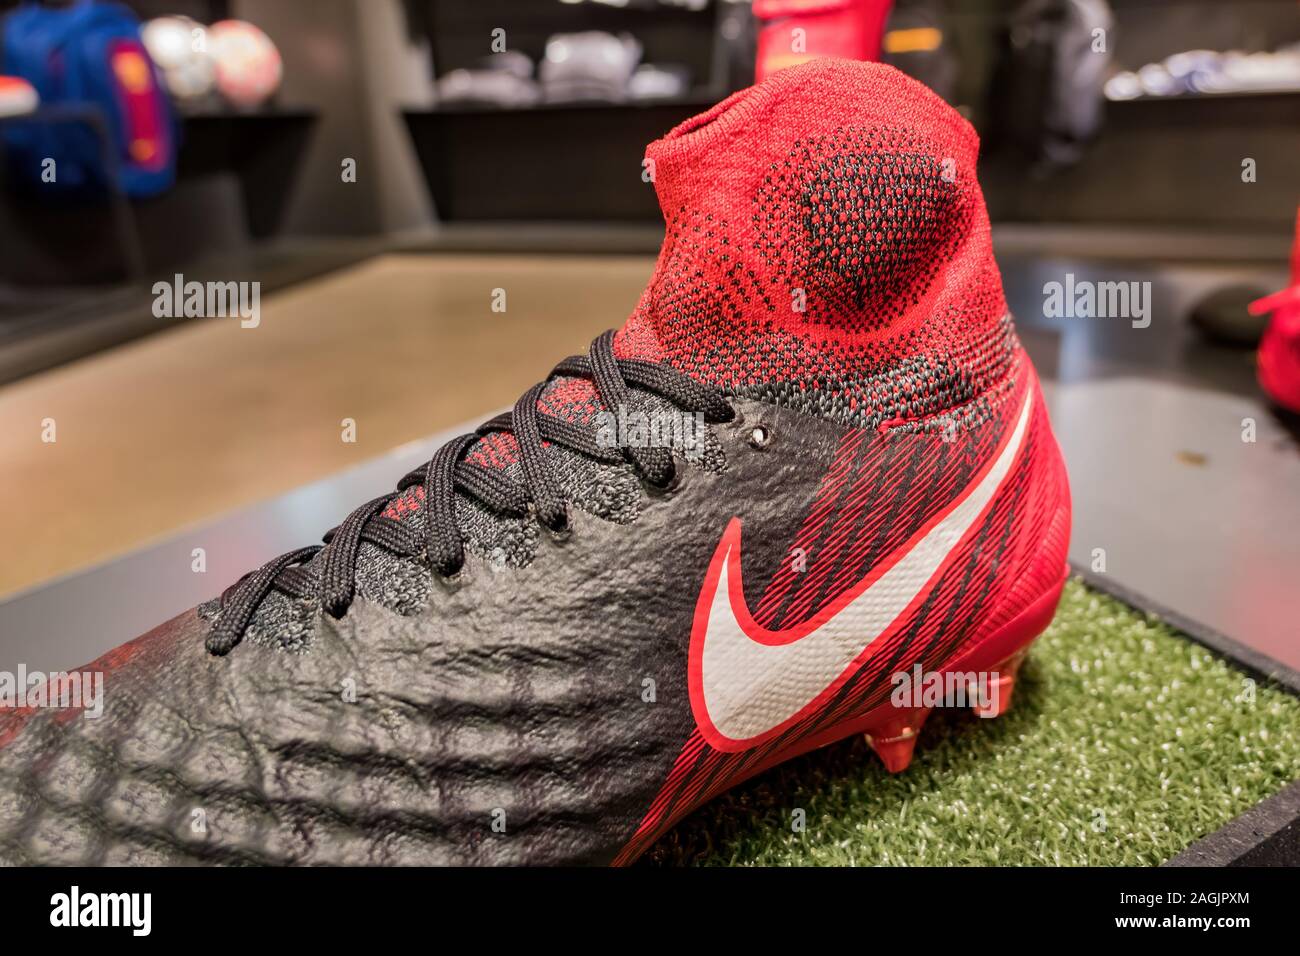 Sports Shop Interior High Resolution Stock Photography and Images - Alamy